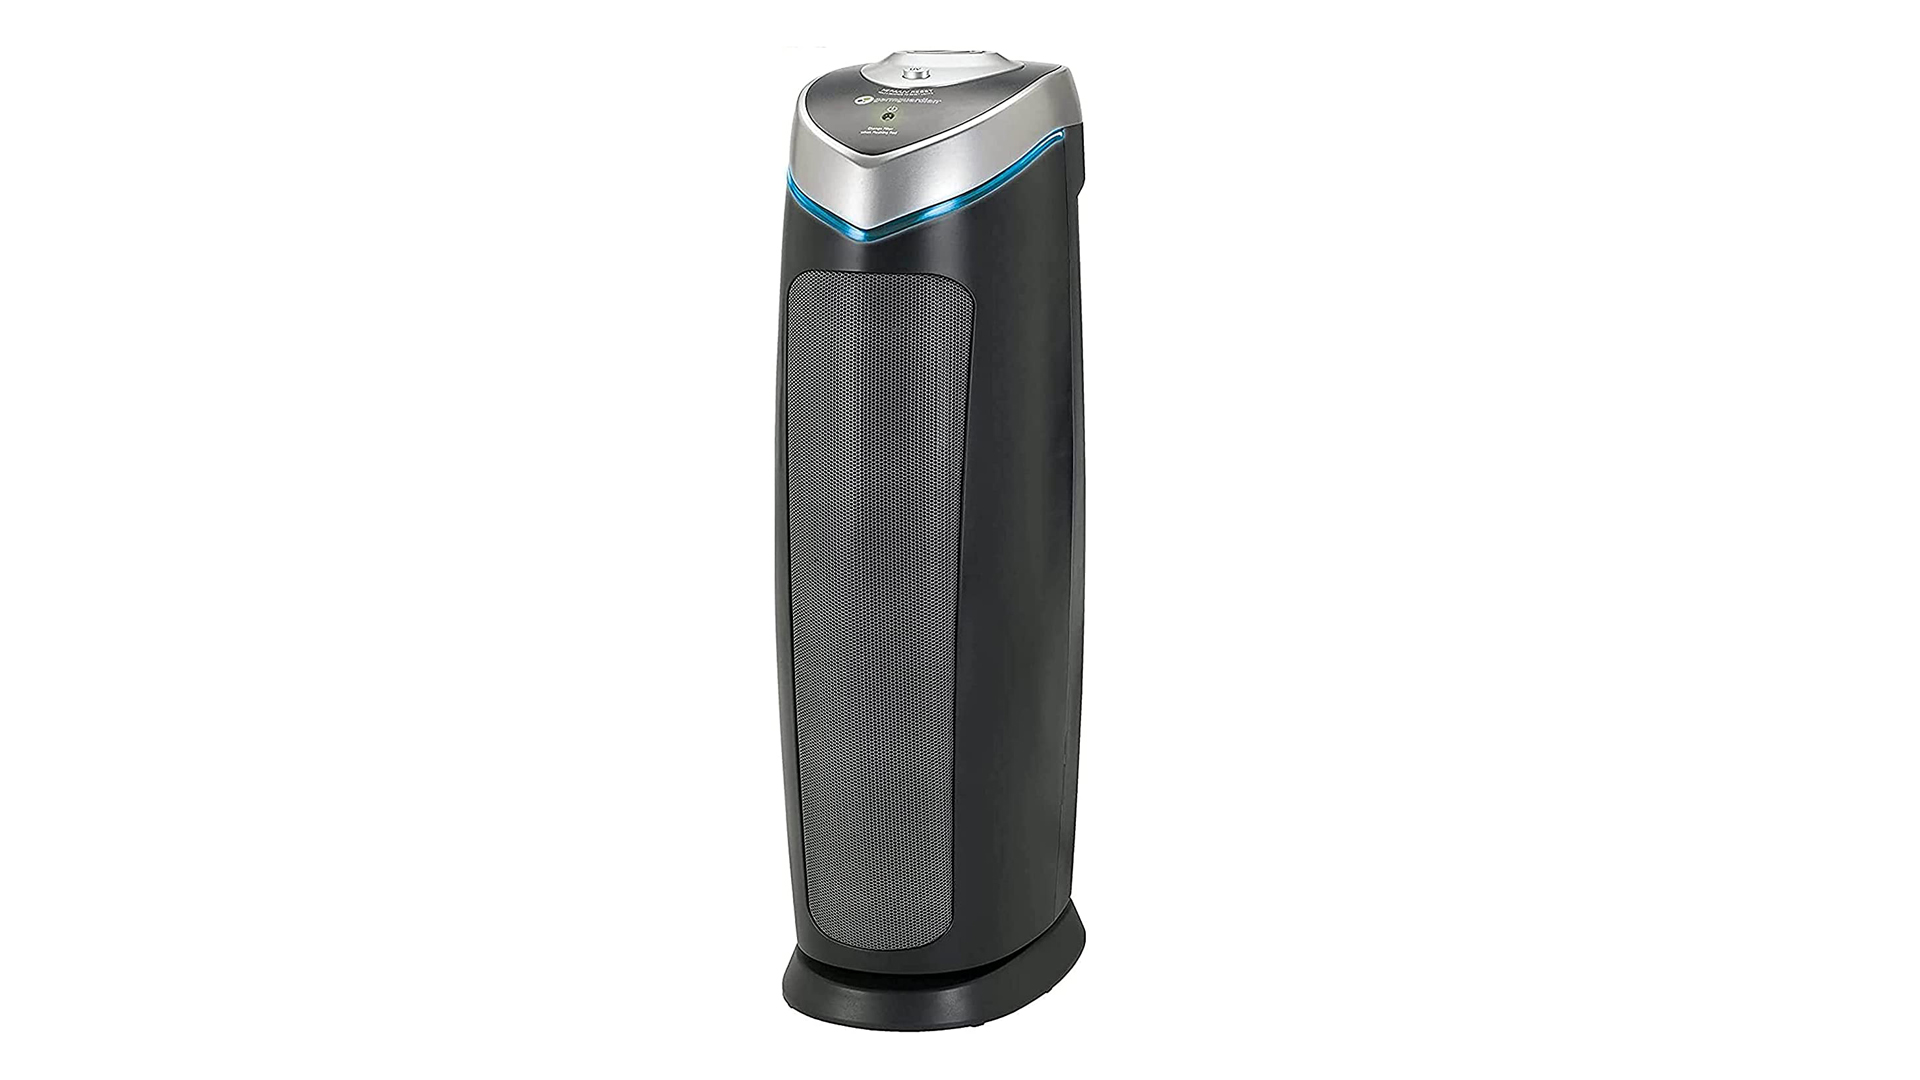 Air purifiers for allergies: Image of GermGuardian air purifier